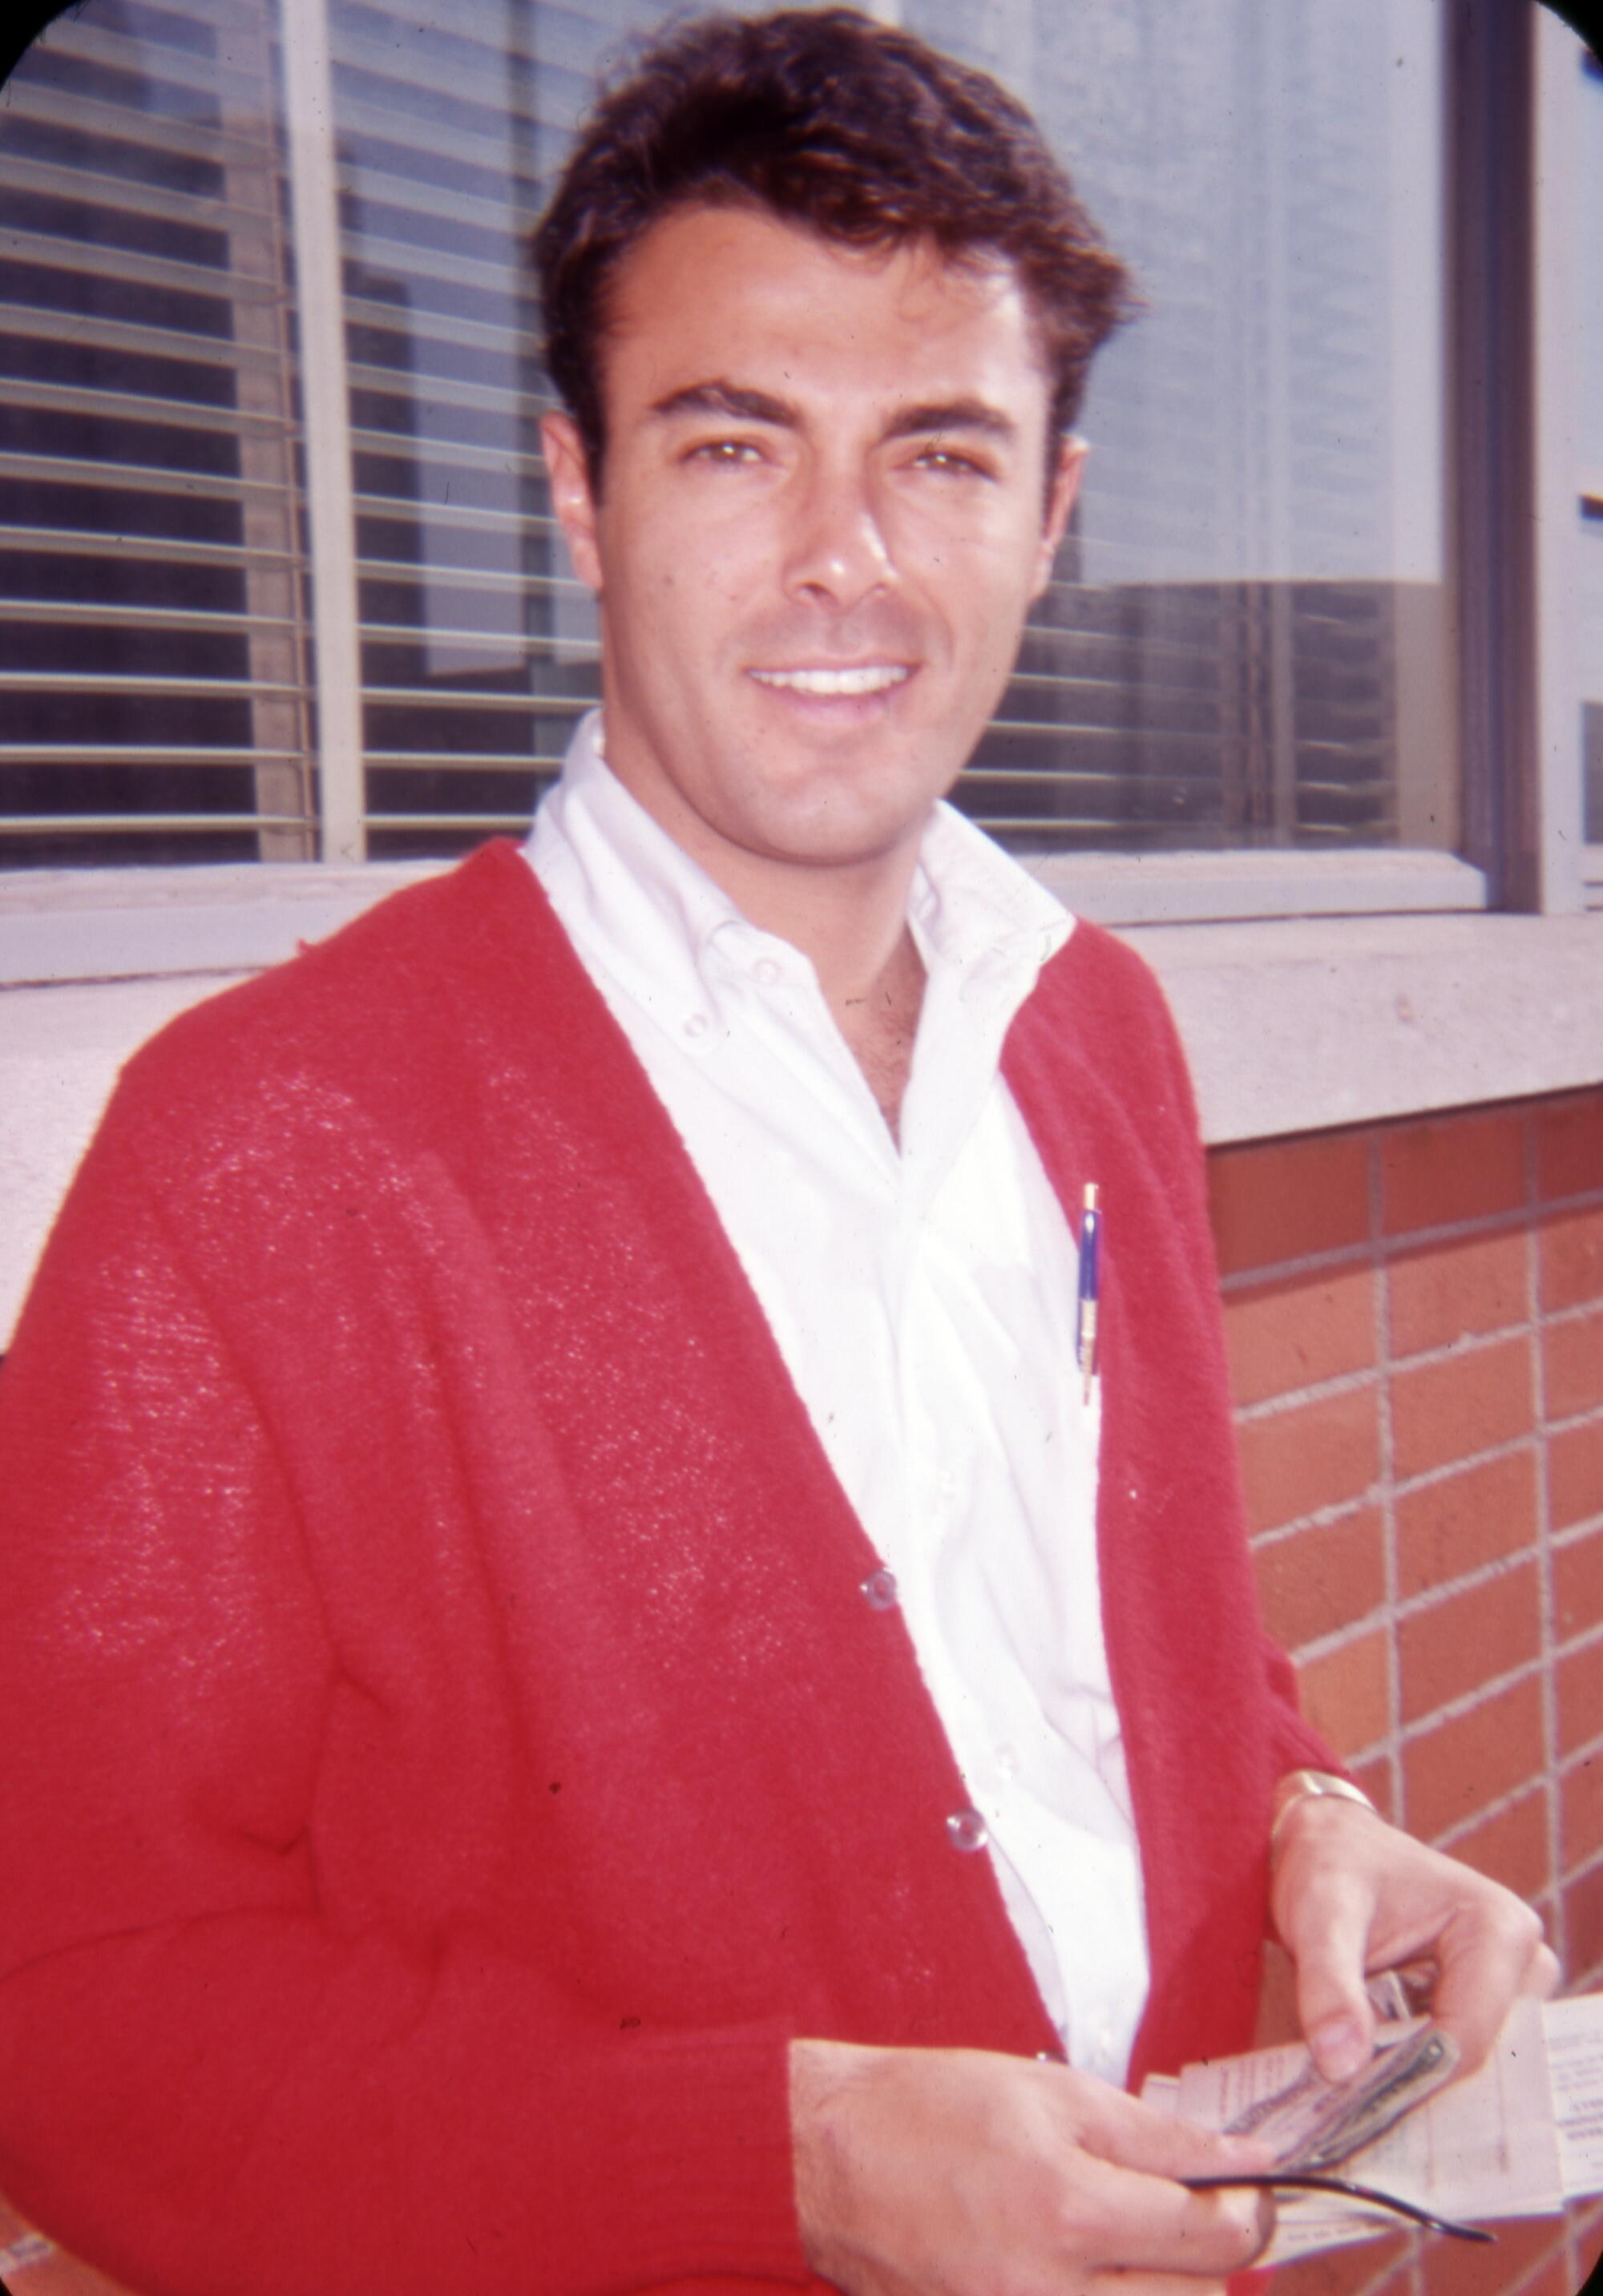 A man in a red jacket open at the front smiles toward the camera